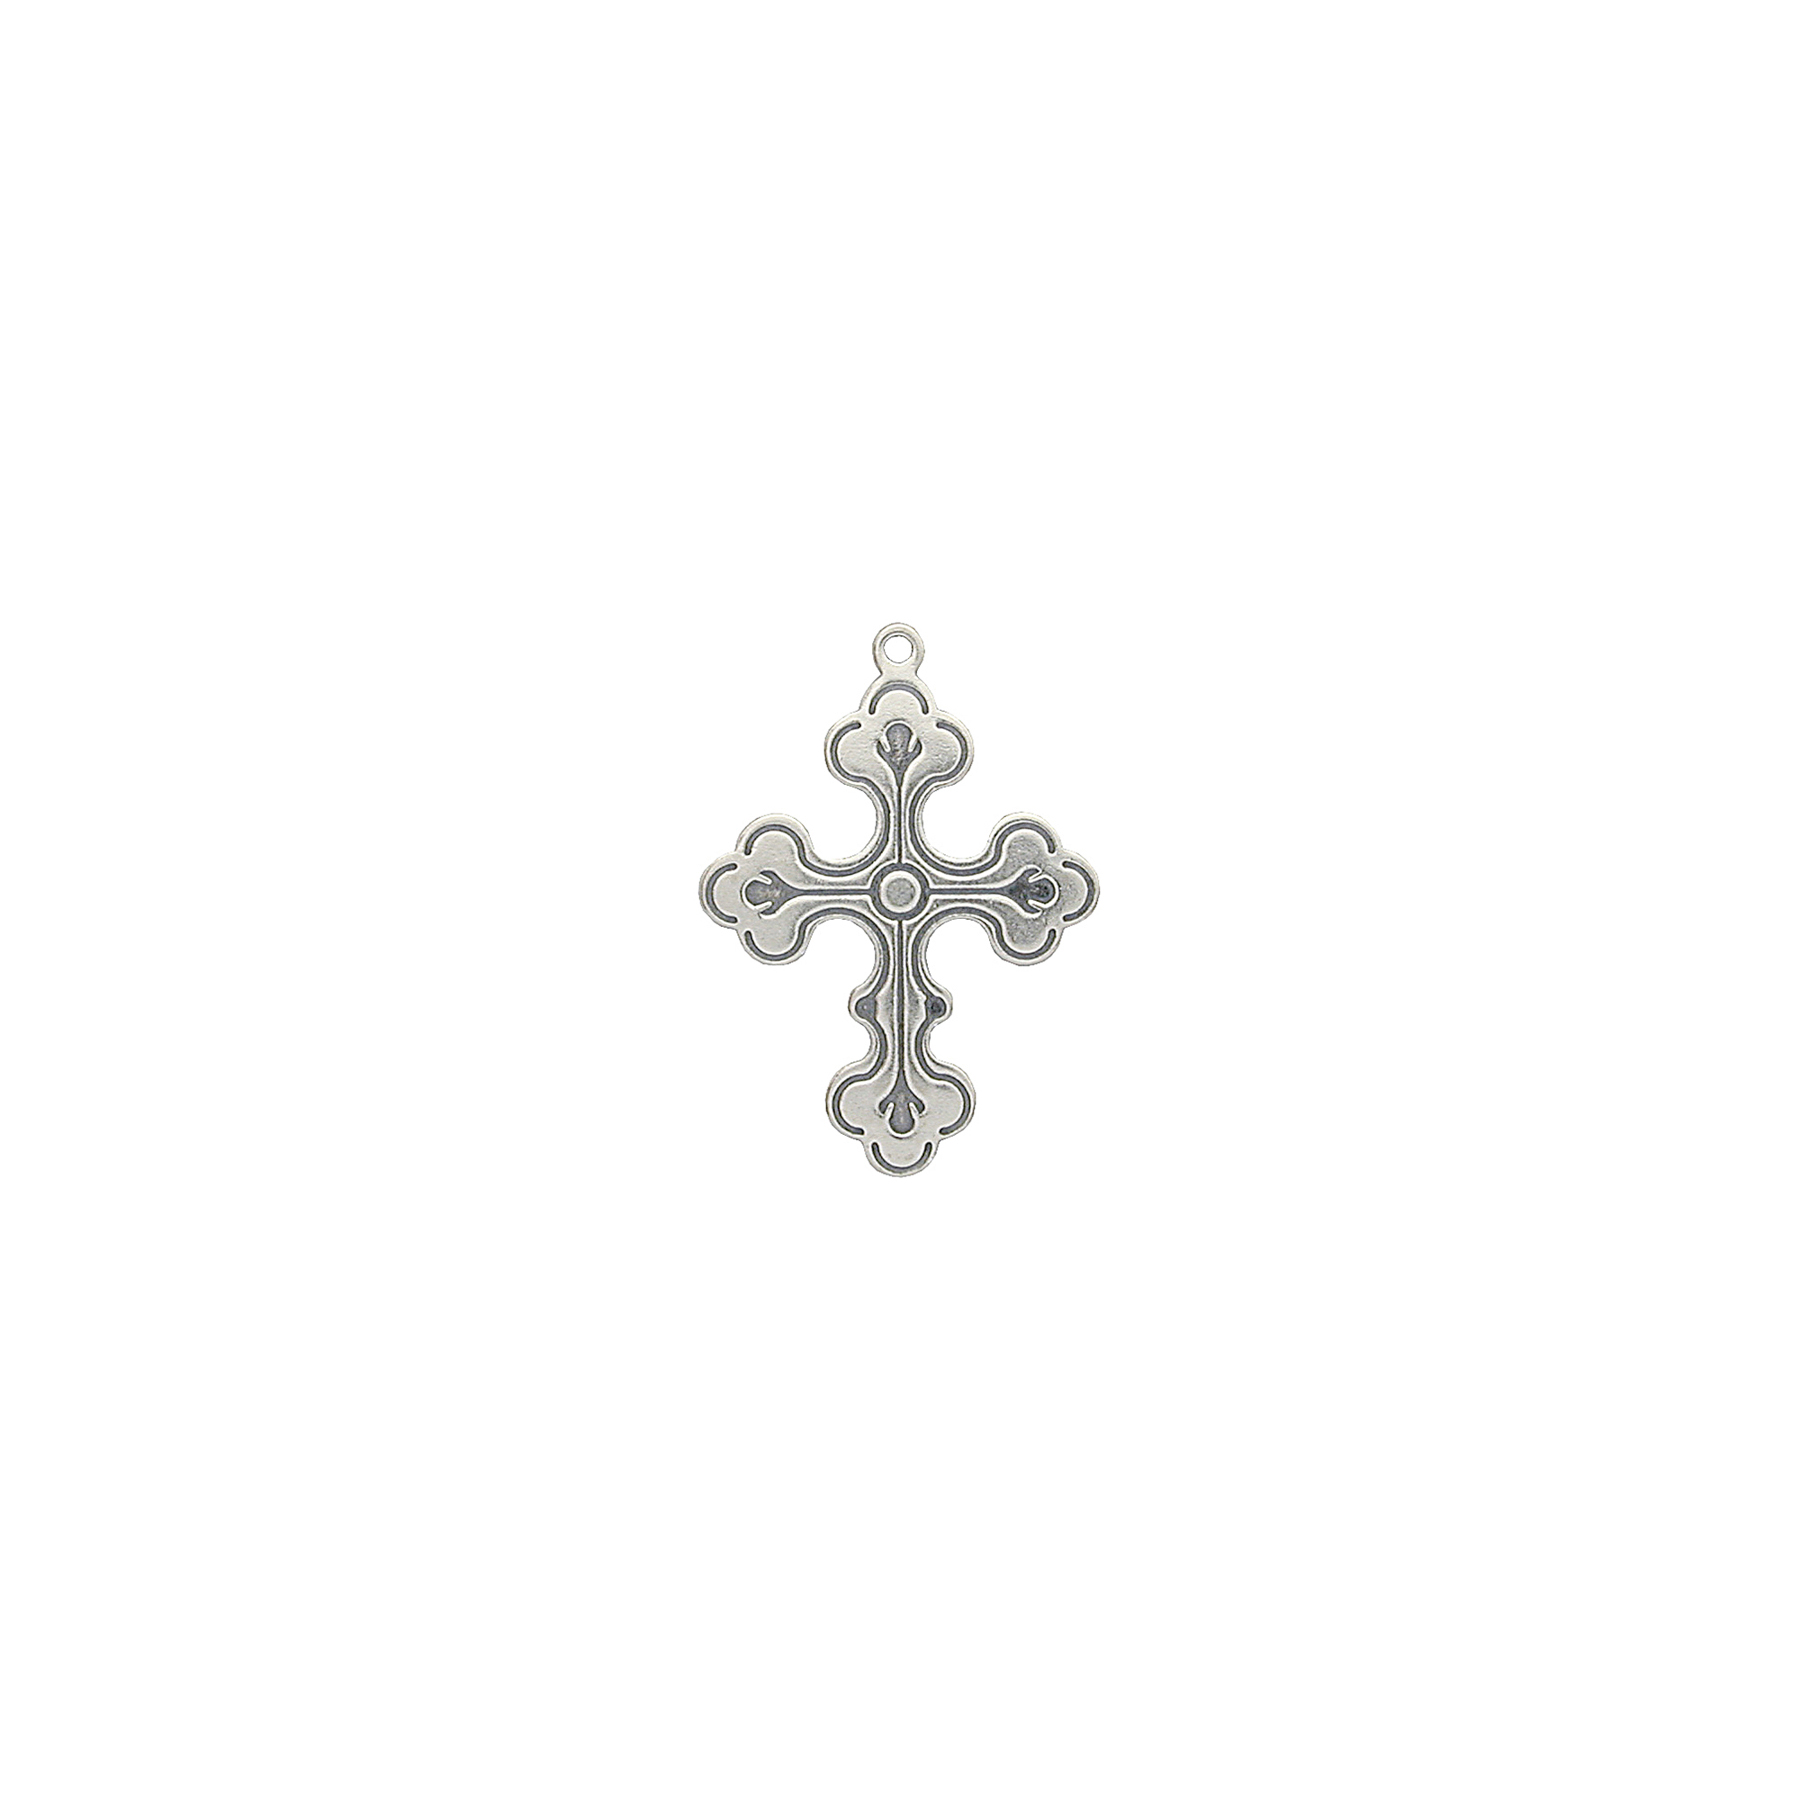 Scalloped Cross Sterling Silver Charm